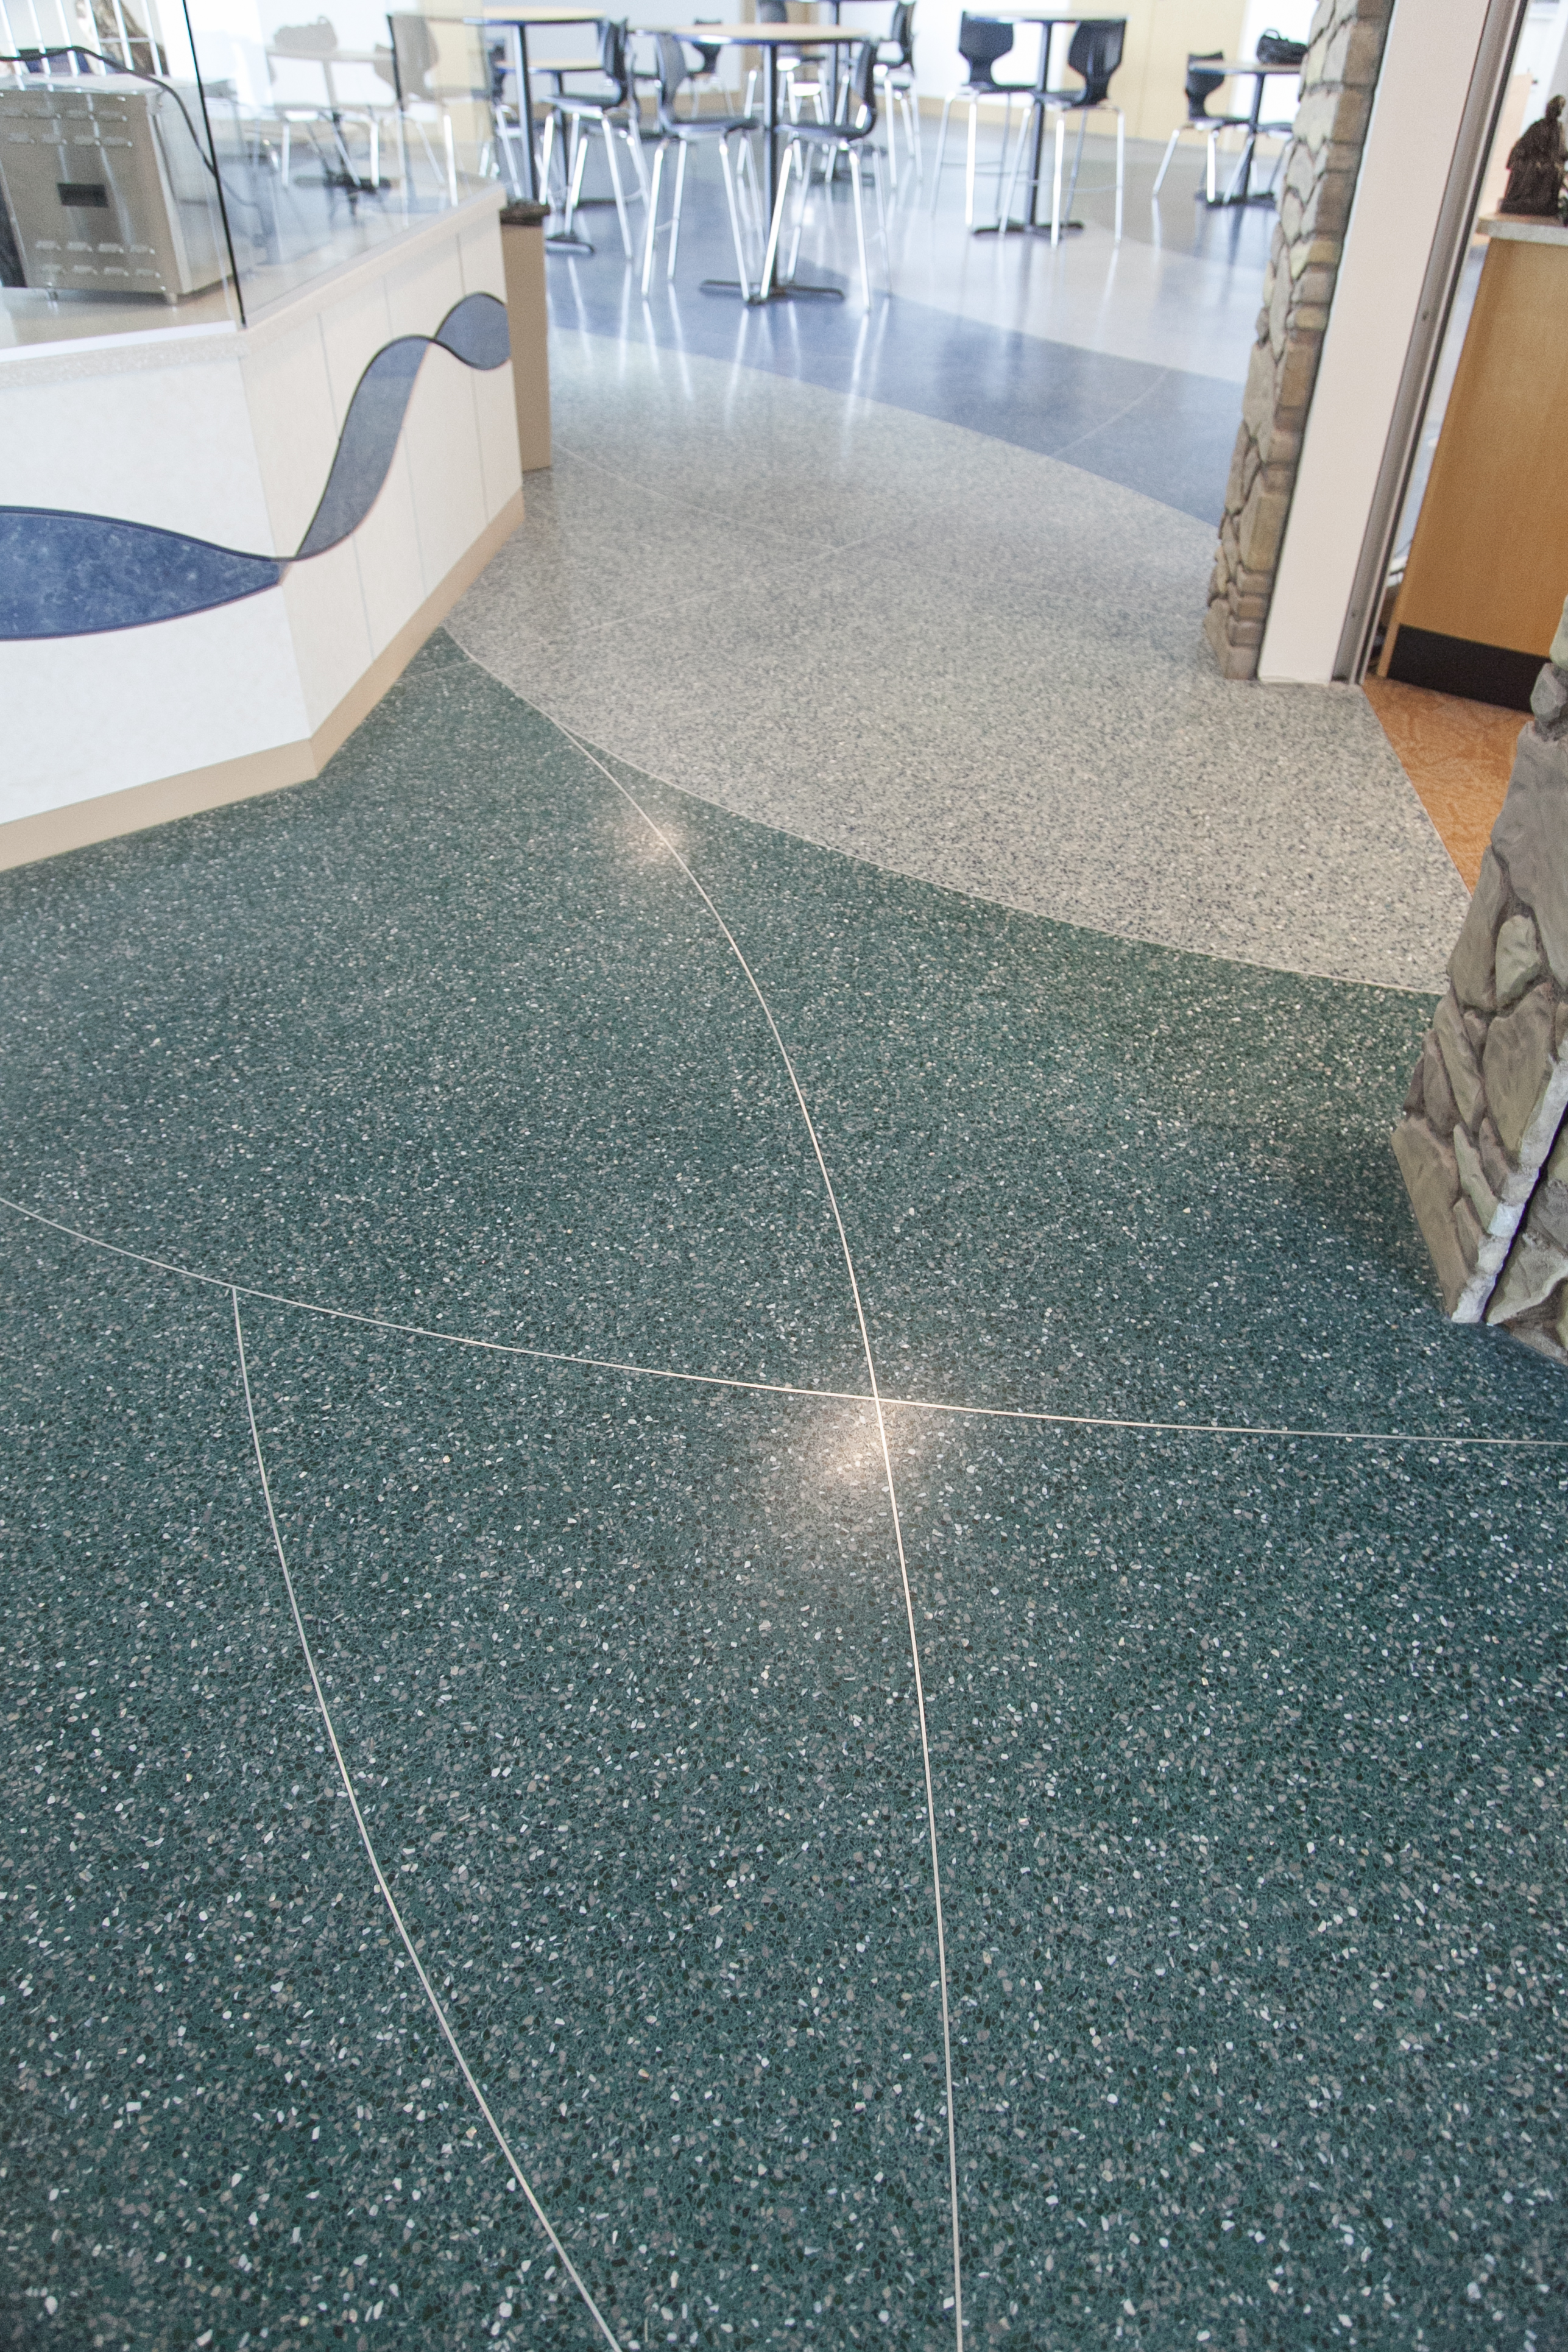 Green Terrazzo Floors at Ft. Myers Beach Library